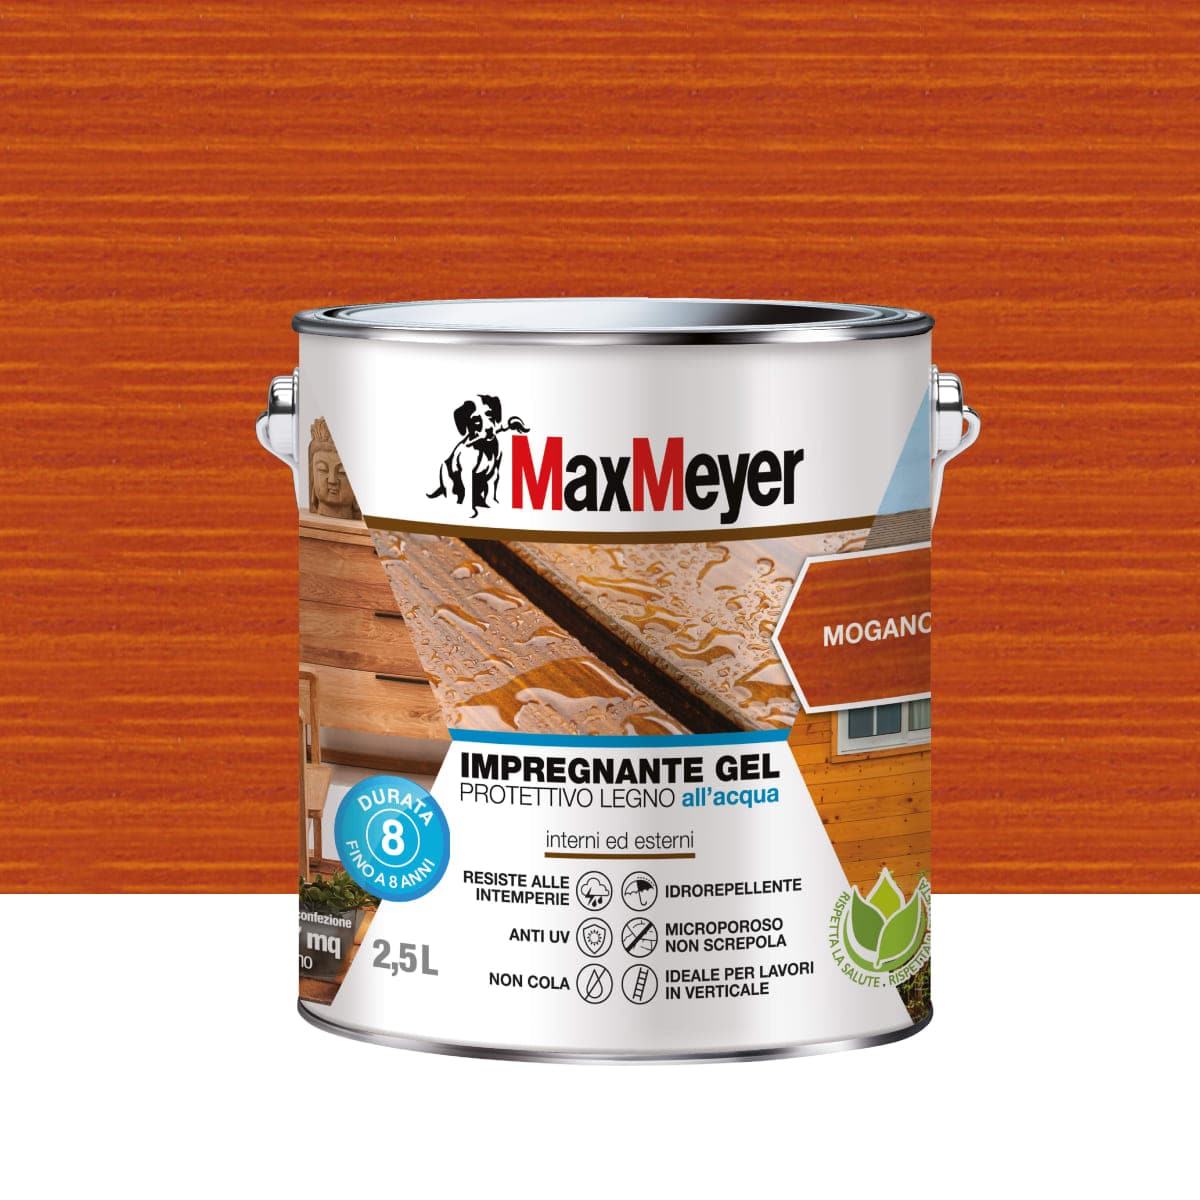 WATER-BASED MAHOGANY WOOD IMPREGNANTE IN GEL Max M. 2.5 TL - best price from Maltashopper.com BR470005016